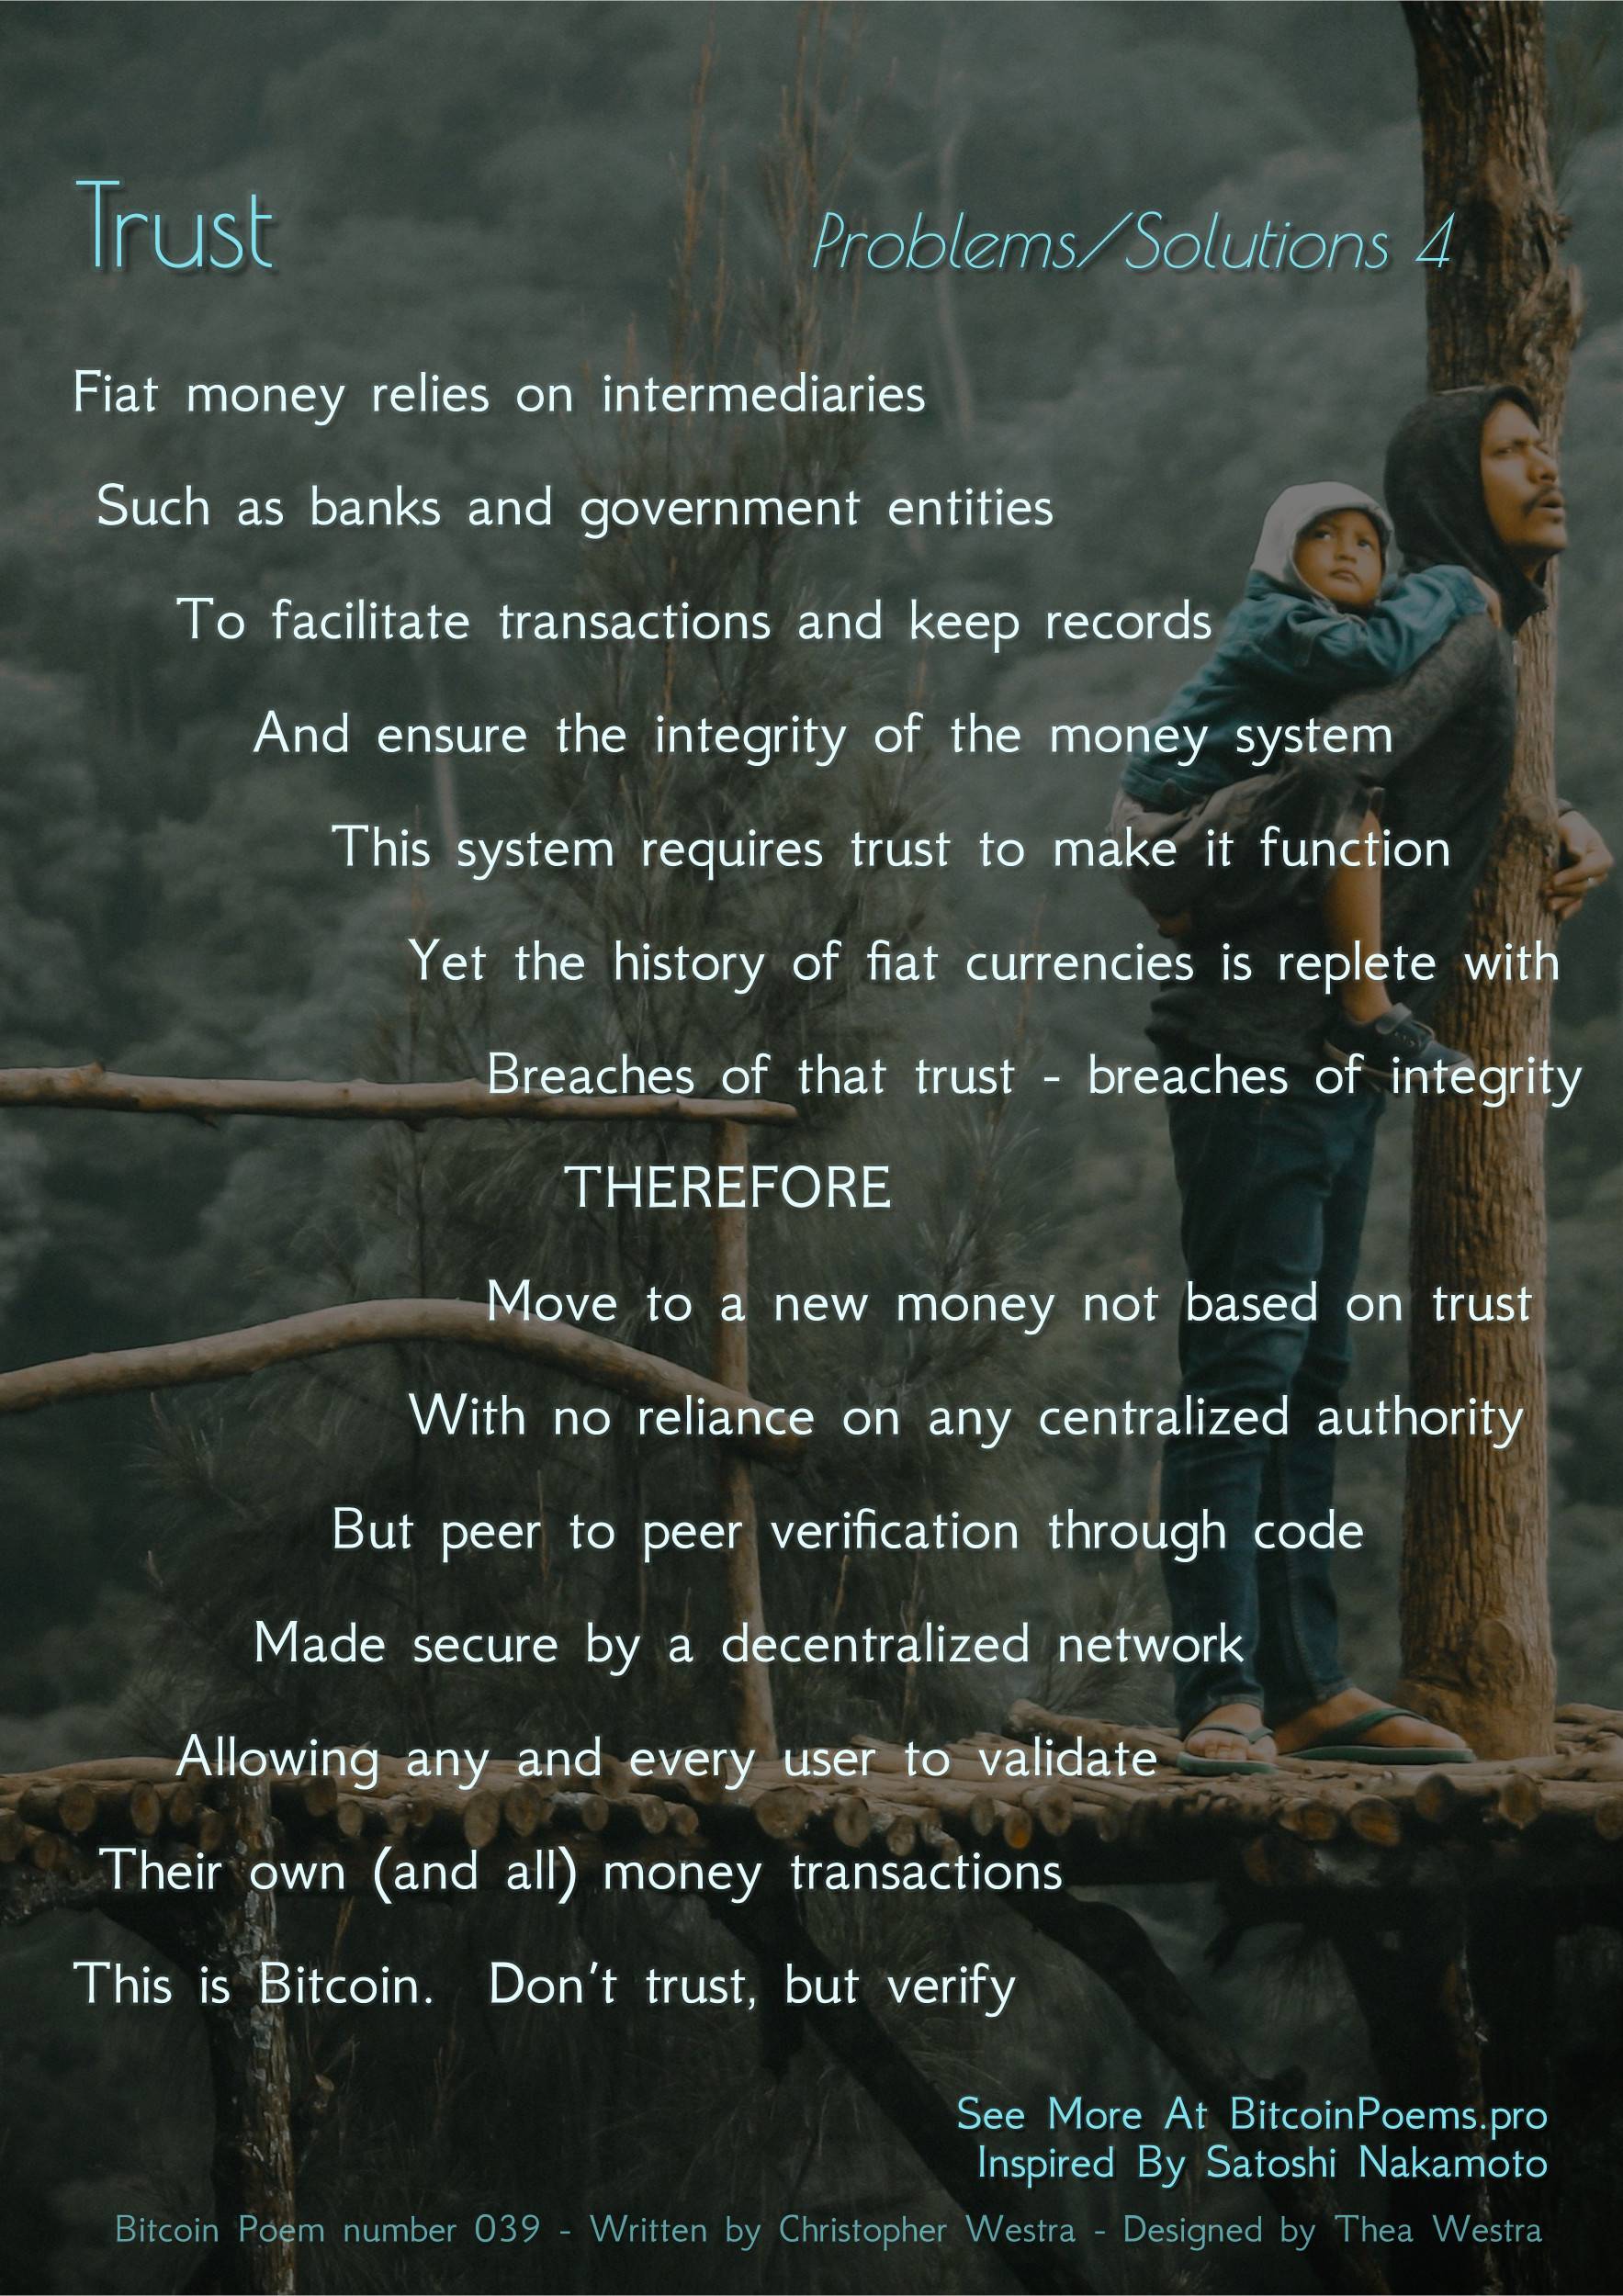 Trust - Bitcoin Poem 039 by Christopher Westra